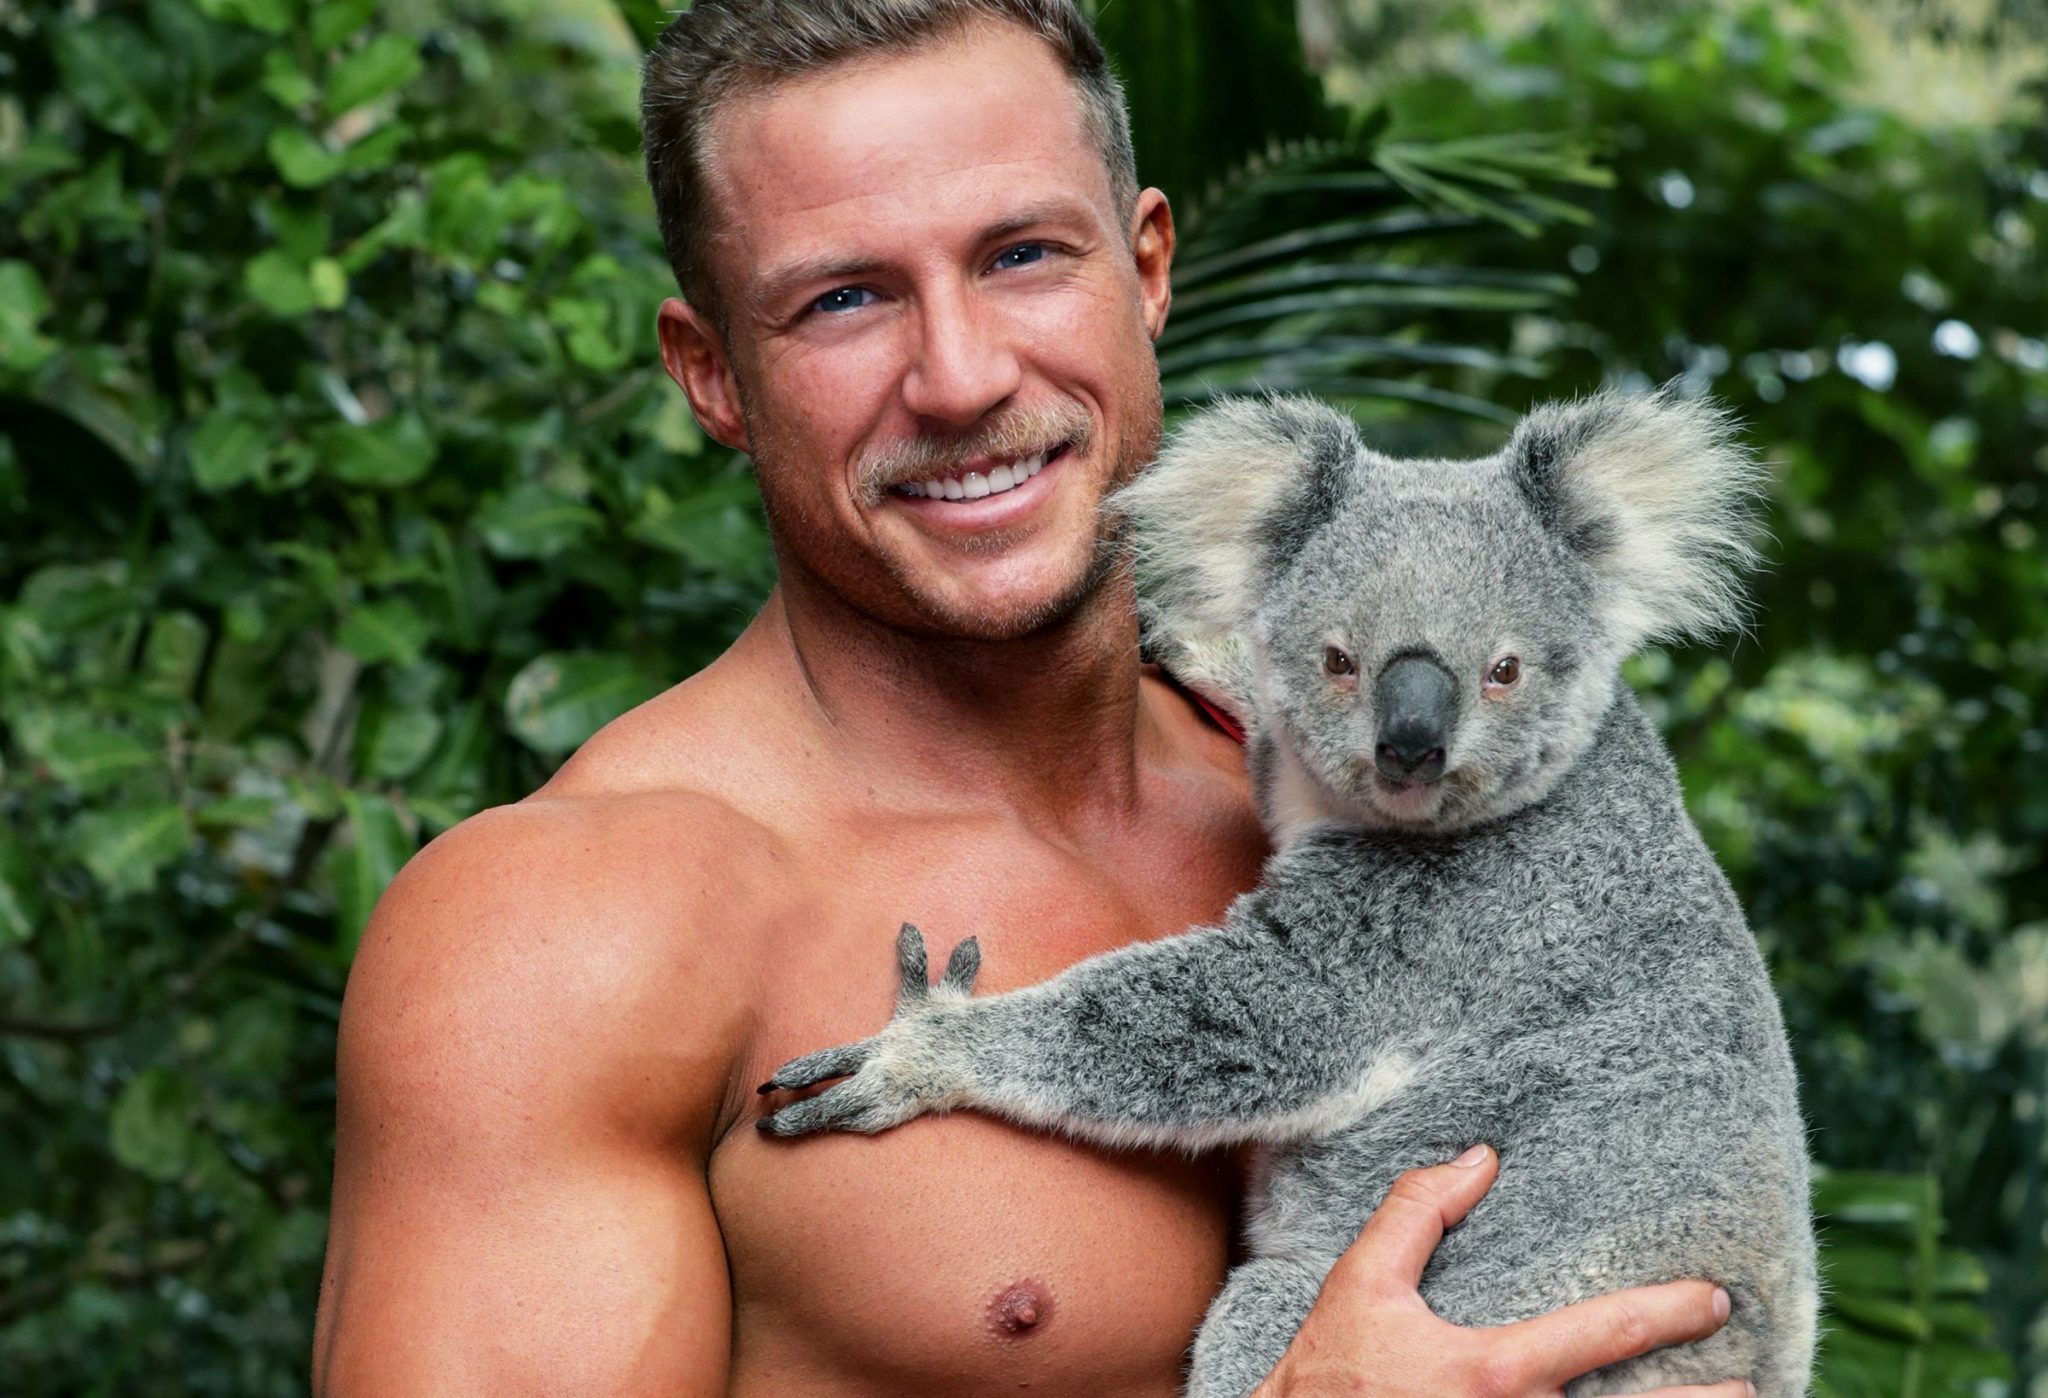 the-australian-firefighters-calendar-is-back-with-more-of-our-shirtless